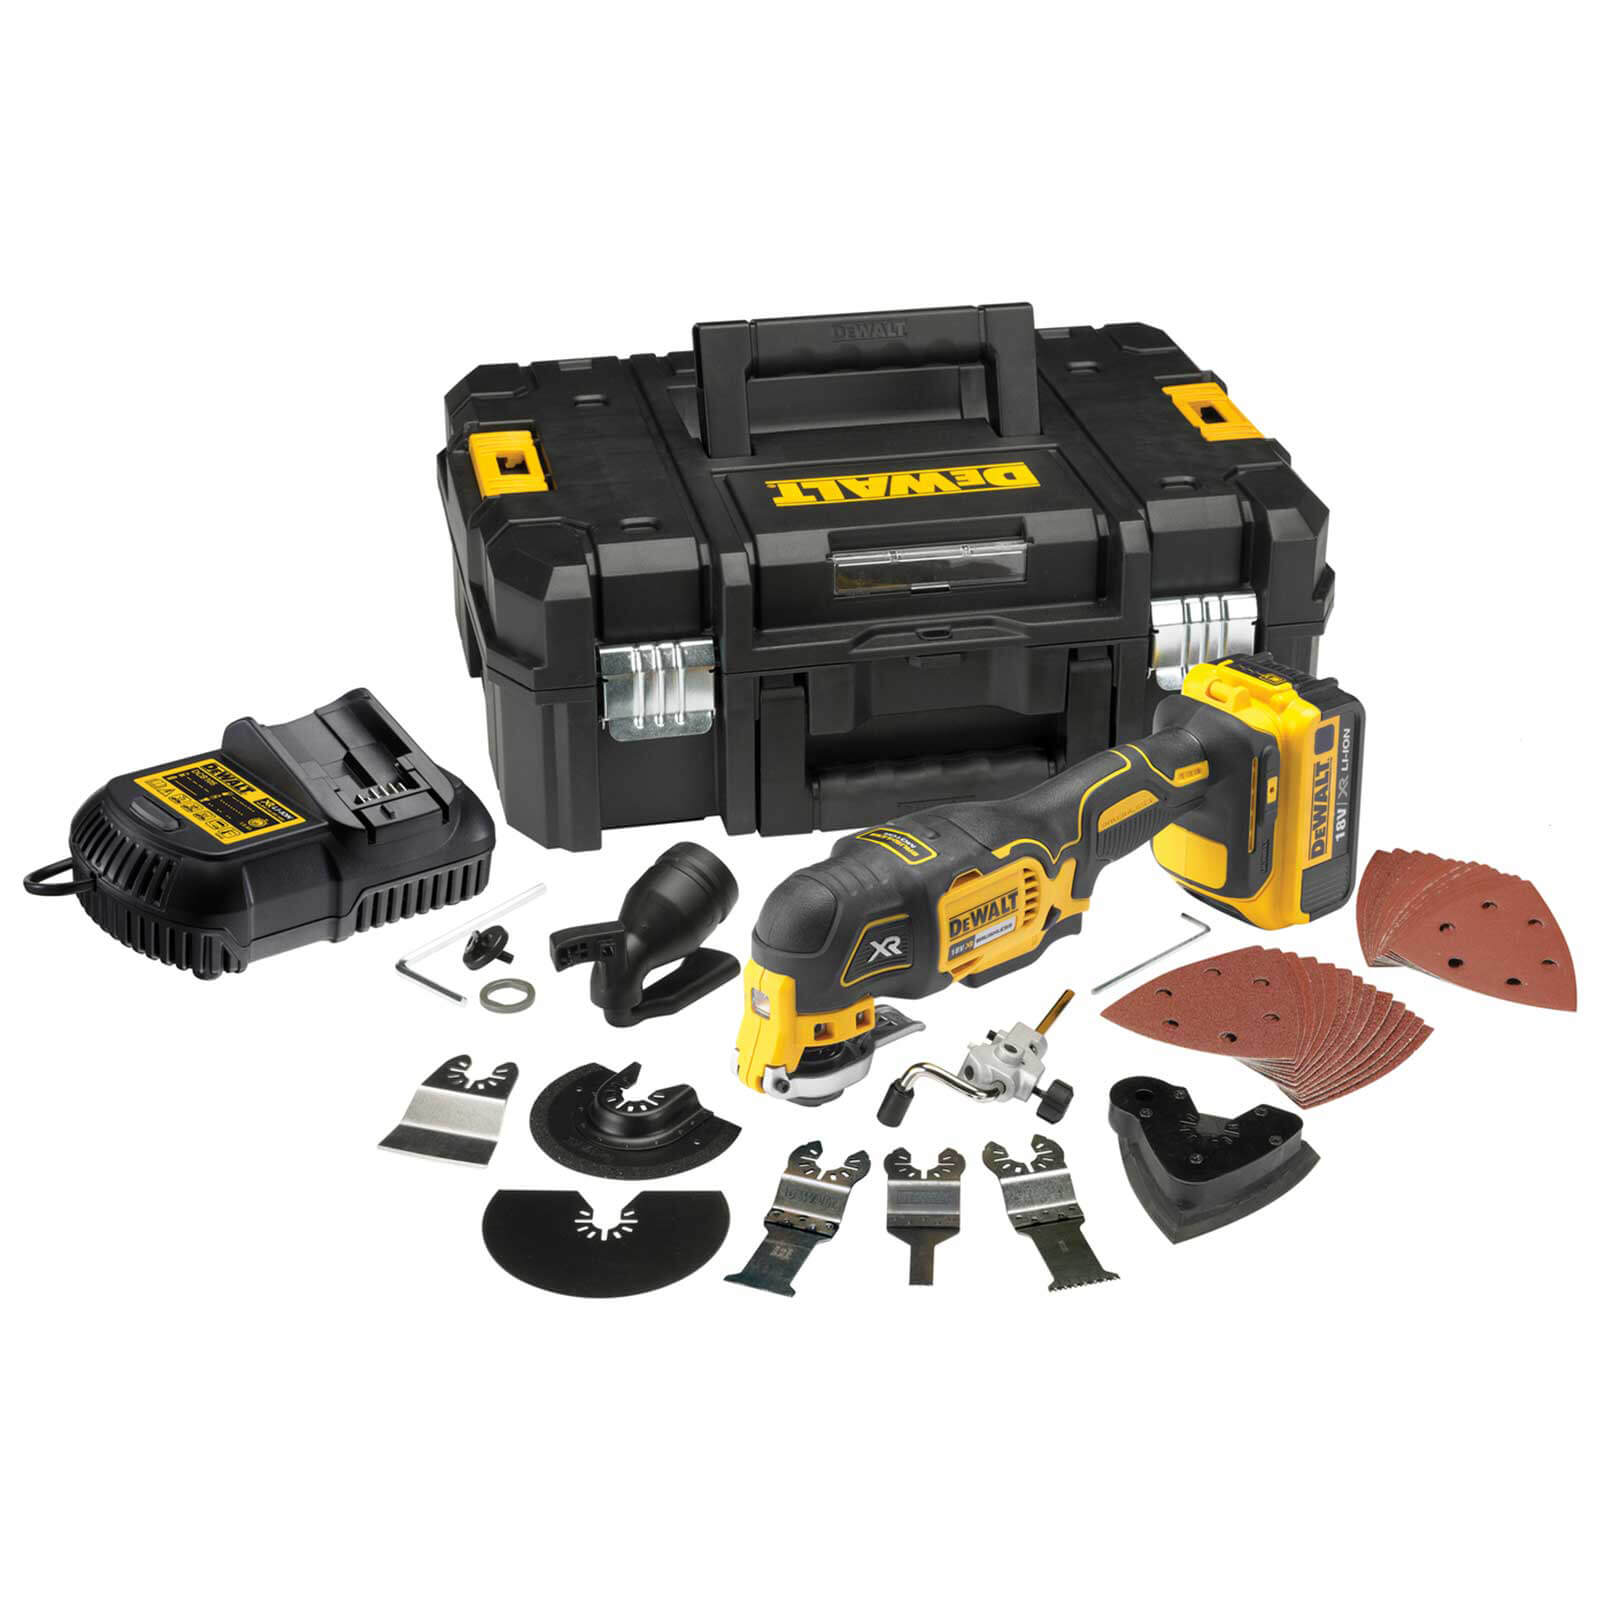 Image of DeWalt DCS355 18v XR Cordless Brushless Oscillating Multi Tool 1 x 5ah Li-ion Charger Case & Accessories